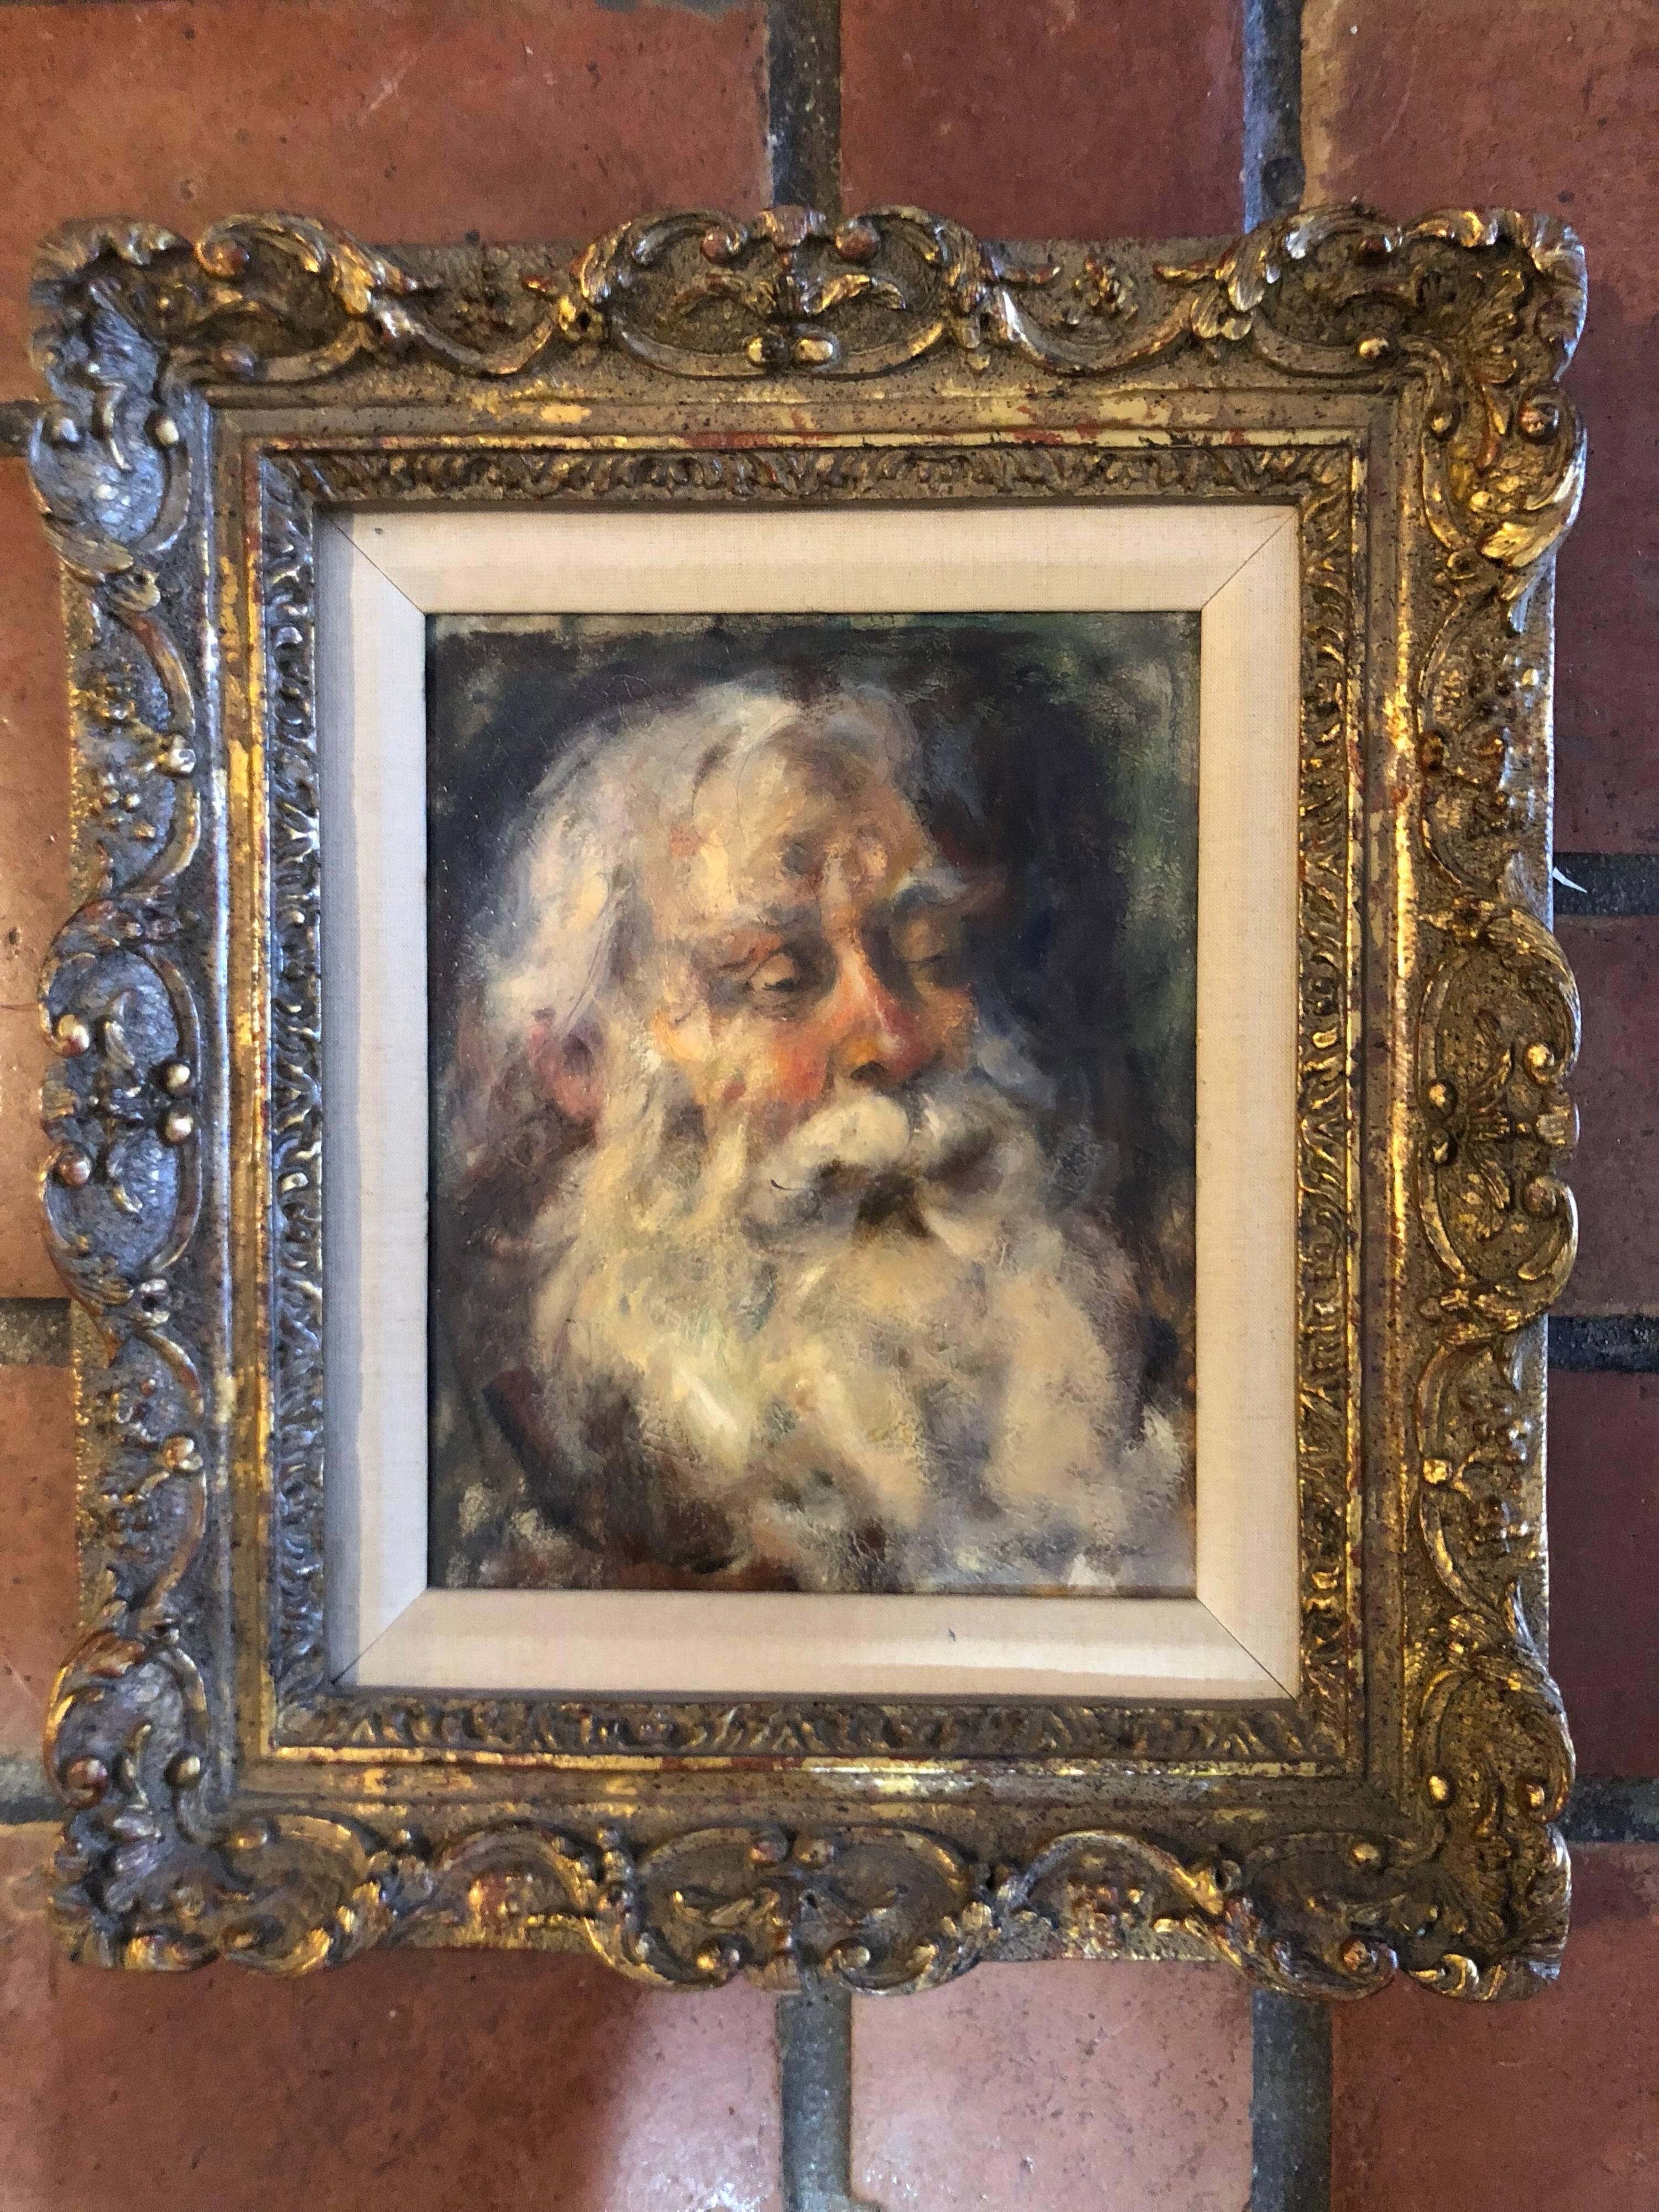 Oil on Board of Talmudic Scholar attributed to Cydney Grossman (1909-1982). He is known for his figures, portraits, and clown paintings. Also signed on the back. Uncle C. Grossman 88 Hillendale Rd Westport ,CT 06880. Perhaps this is a family